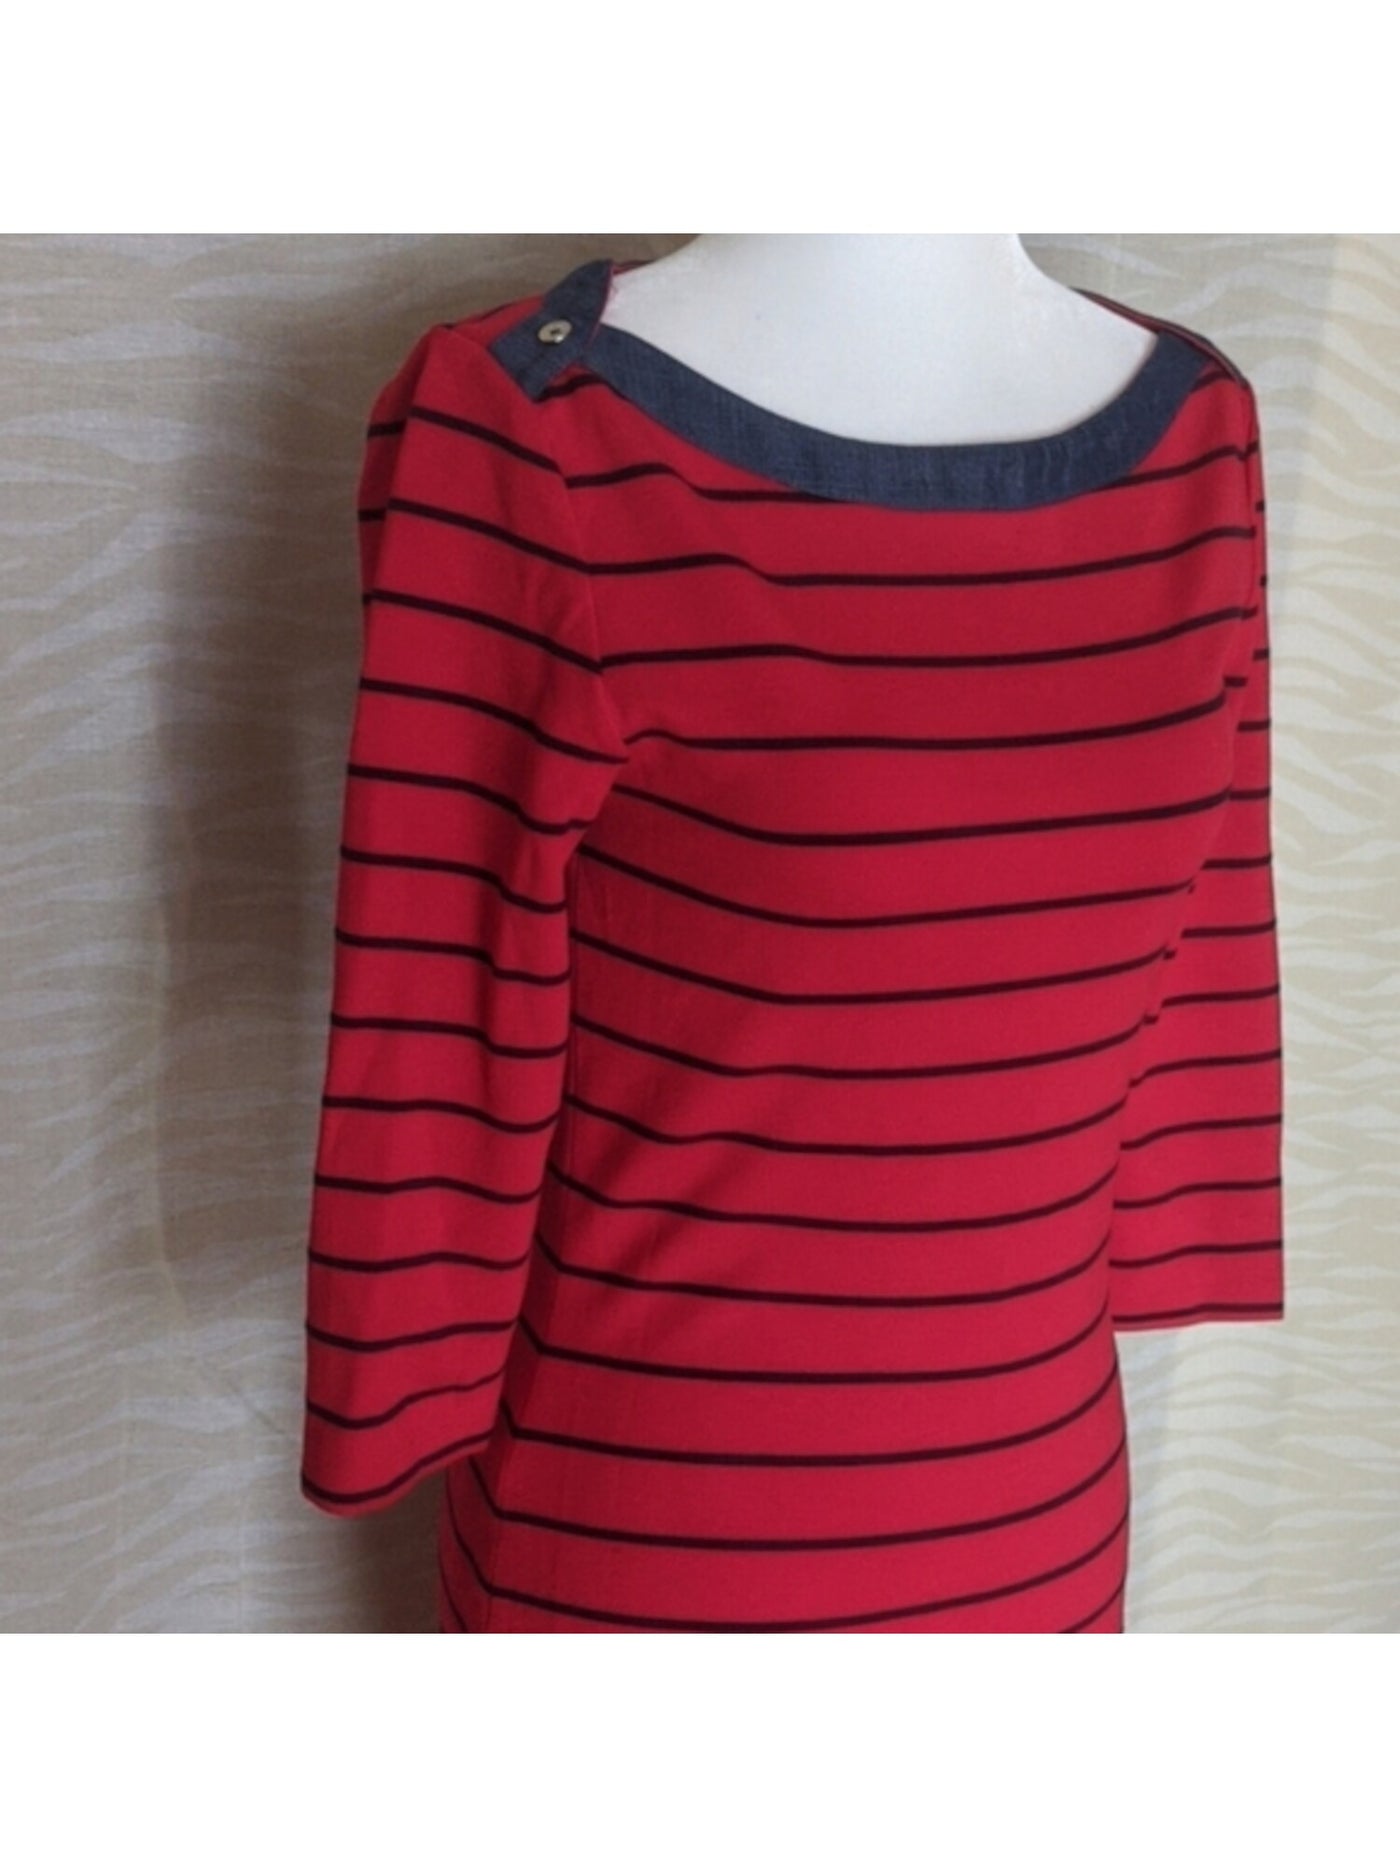 TOMMY HILFIGER Womens Red Stretch Striped 3/4 Sleeve Boat Neck Knee Length Sheath Dress M